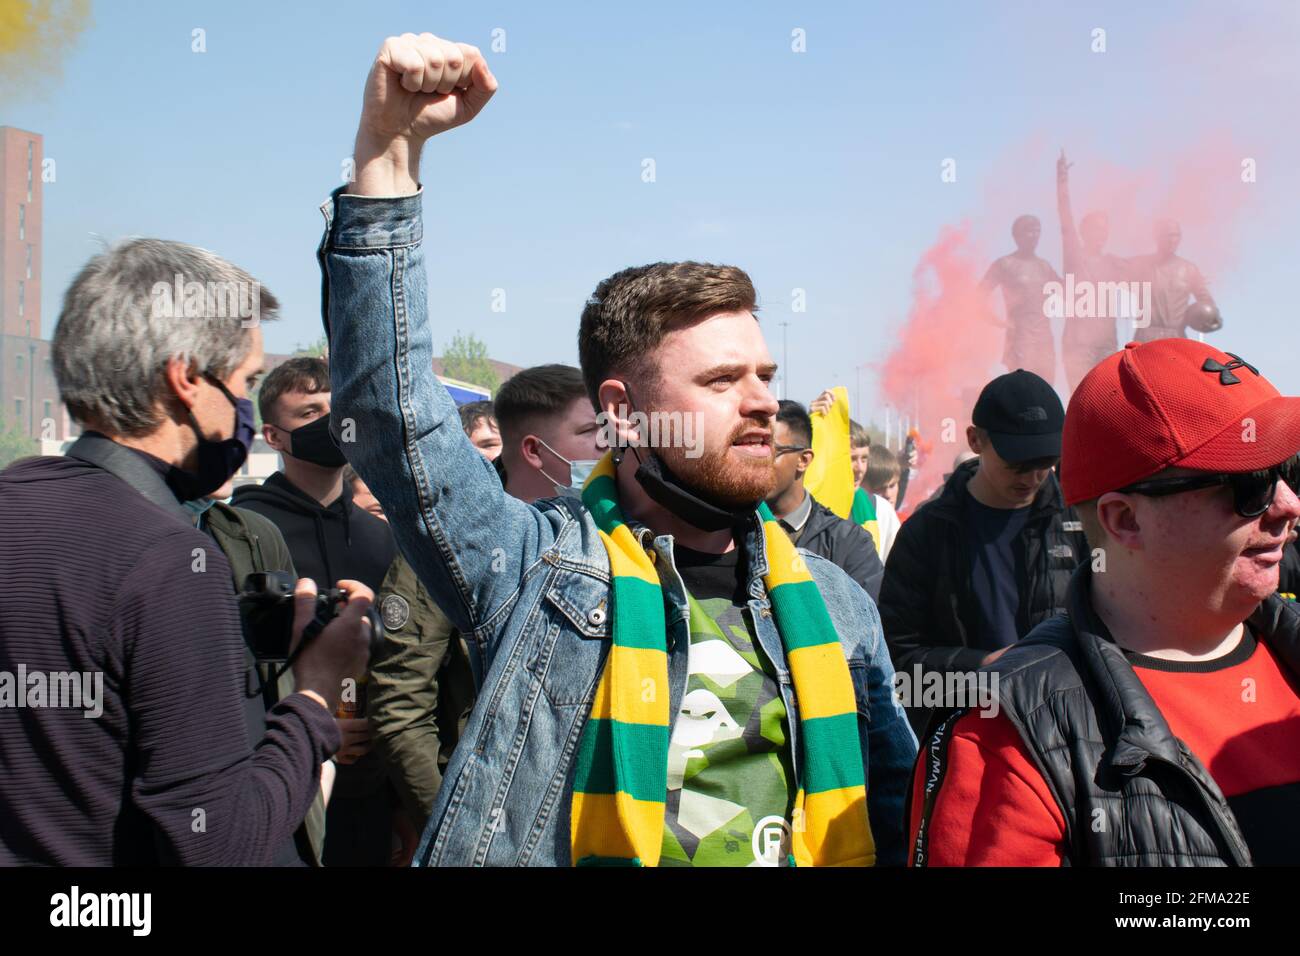 Protest against Glazer at Old Trafford football ground. Supporter holding fist up and wearing green and gold scarf Stock Photo